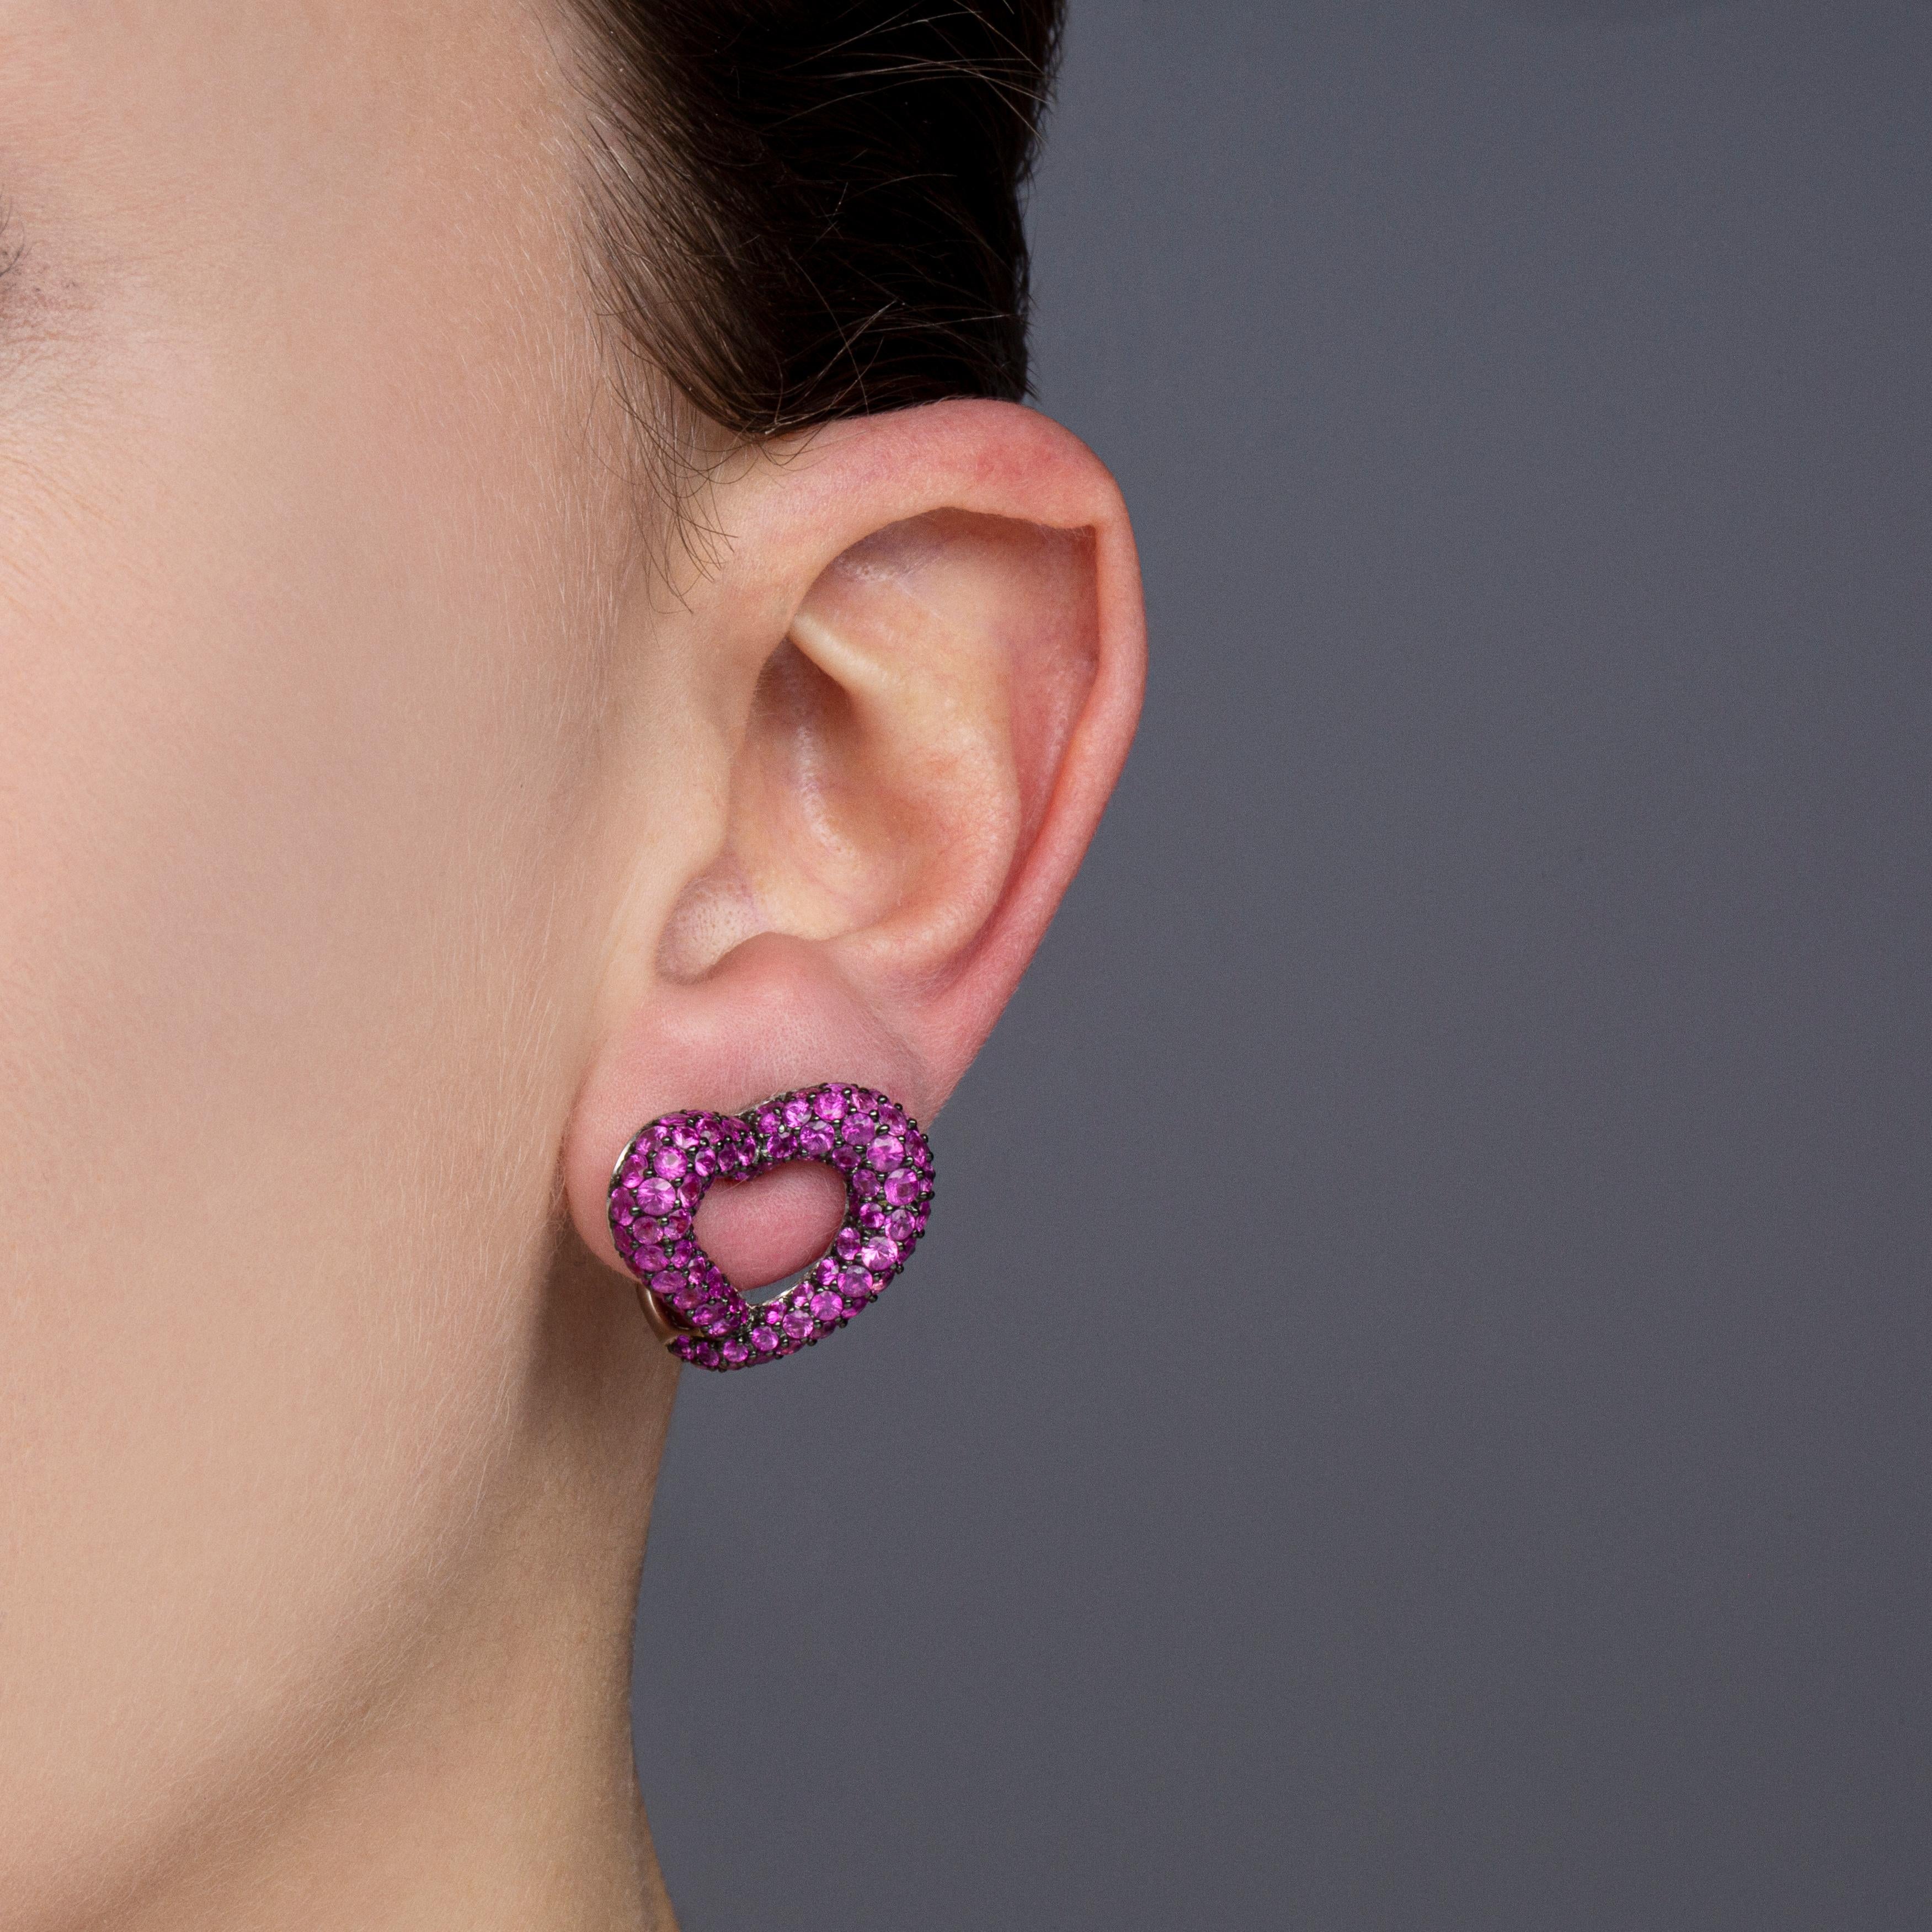 Alex Jona design collection, hand crafted in Italy, open heart ear clips in 18 karat white gold set with 198 intense Pink Sapphires for a total weighing of 8,74 carats with black rhodium setting.
Dimensions : H 0.78 in x W 0.86 in x D x 0.23 in - H